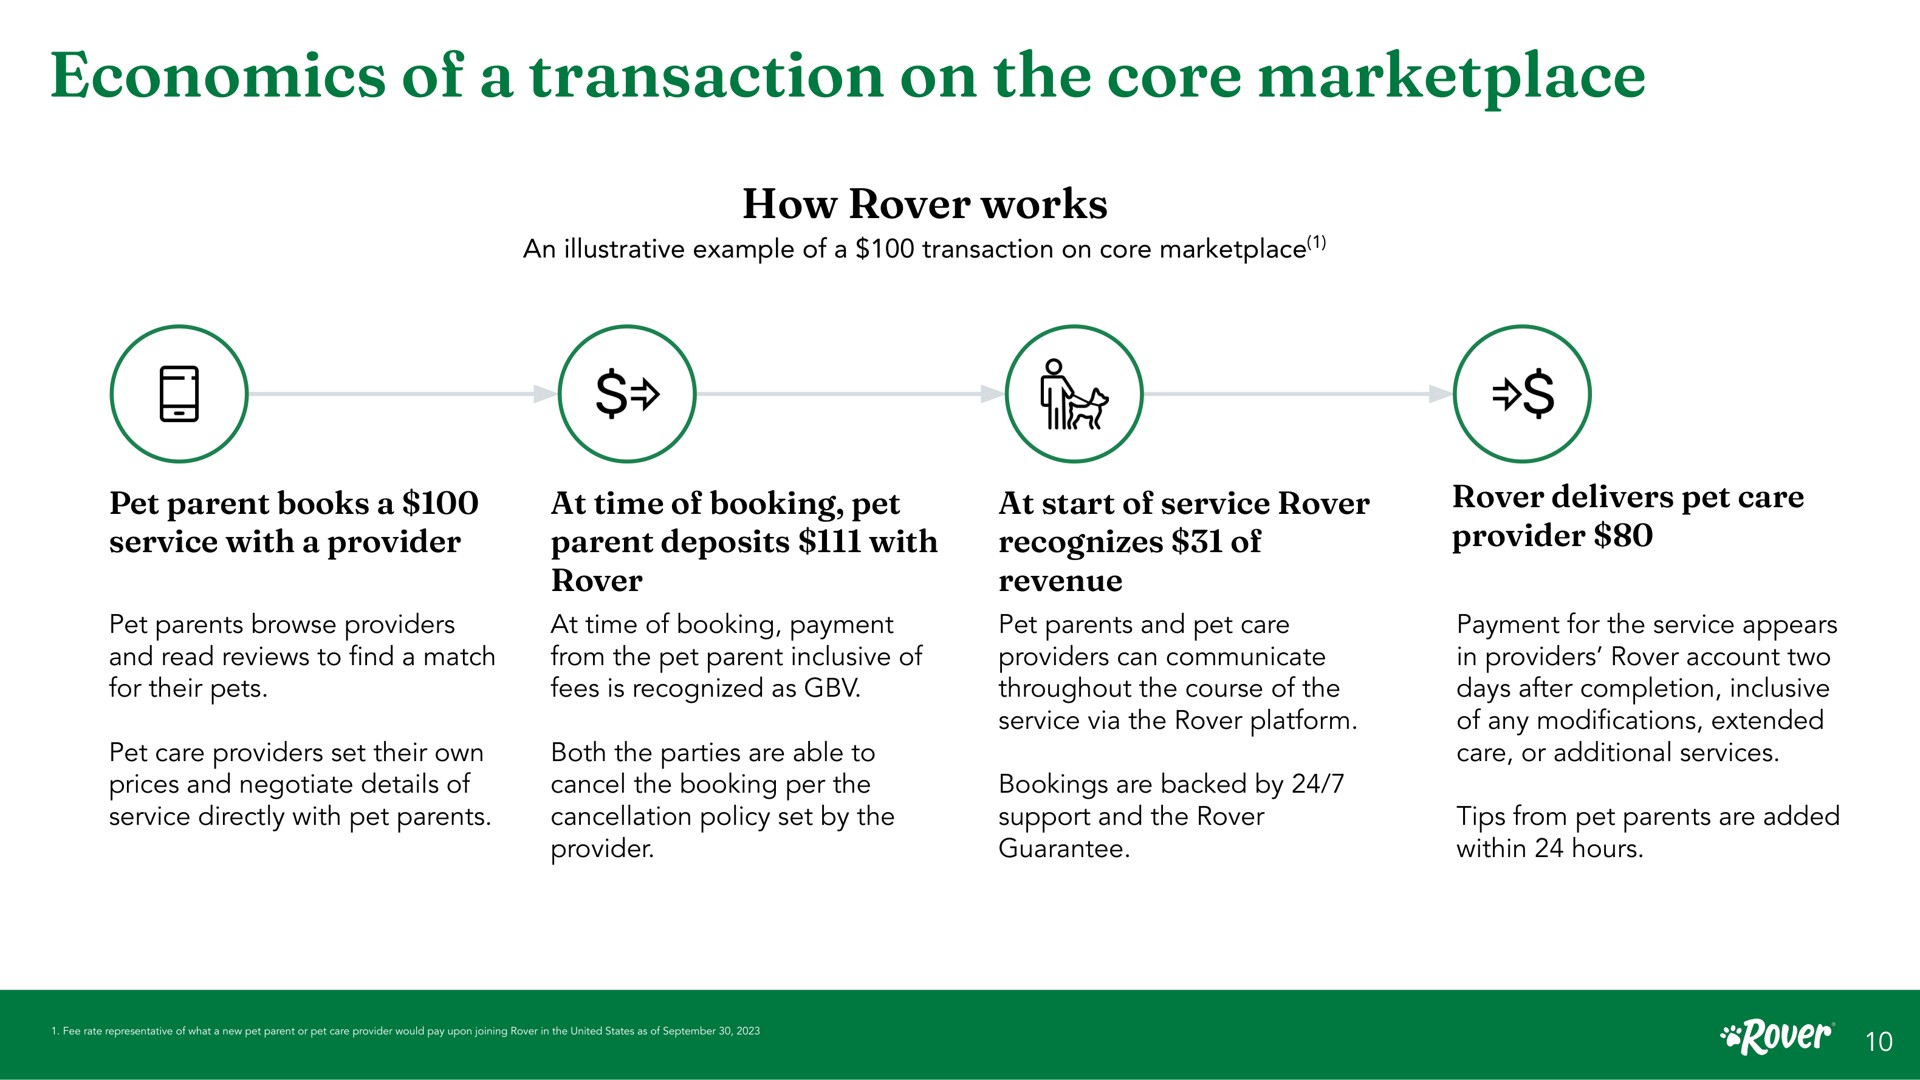 economics of a transaction on the core how rover works an illustrative example pet parent books service with provider pet parents browse providers and read reviews to find match for their pets pet care providers set their own prices and negotiate details service directly with pet parents at time booking pet parent deposits with rover at time booking payment from pet parent inclusive fees is recognized as both parties are able to cancel booking per cancellation policy set by provider at start service rover recognizes revenue pet parents and pet care providers can communicate throughout course service via rover platform bookings are backed by support and rover guarantee rover delivers pet care provider payment for service appears in providers rover account two days after completion inclusive any modifications extended care or additional services tips from pet parents are added within hours | Rover